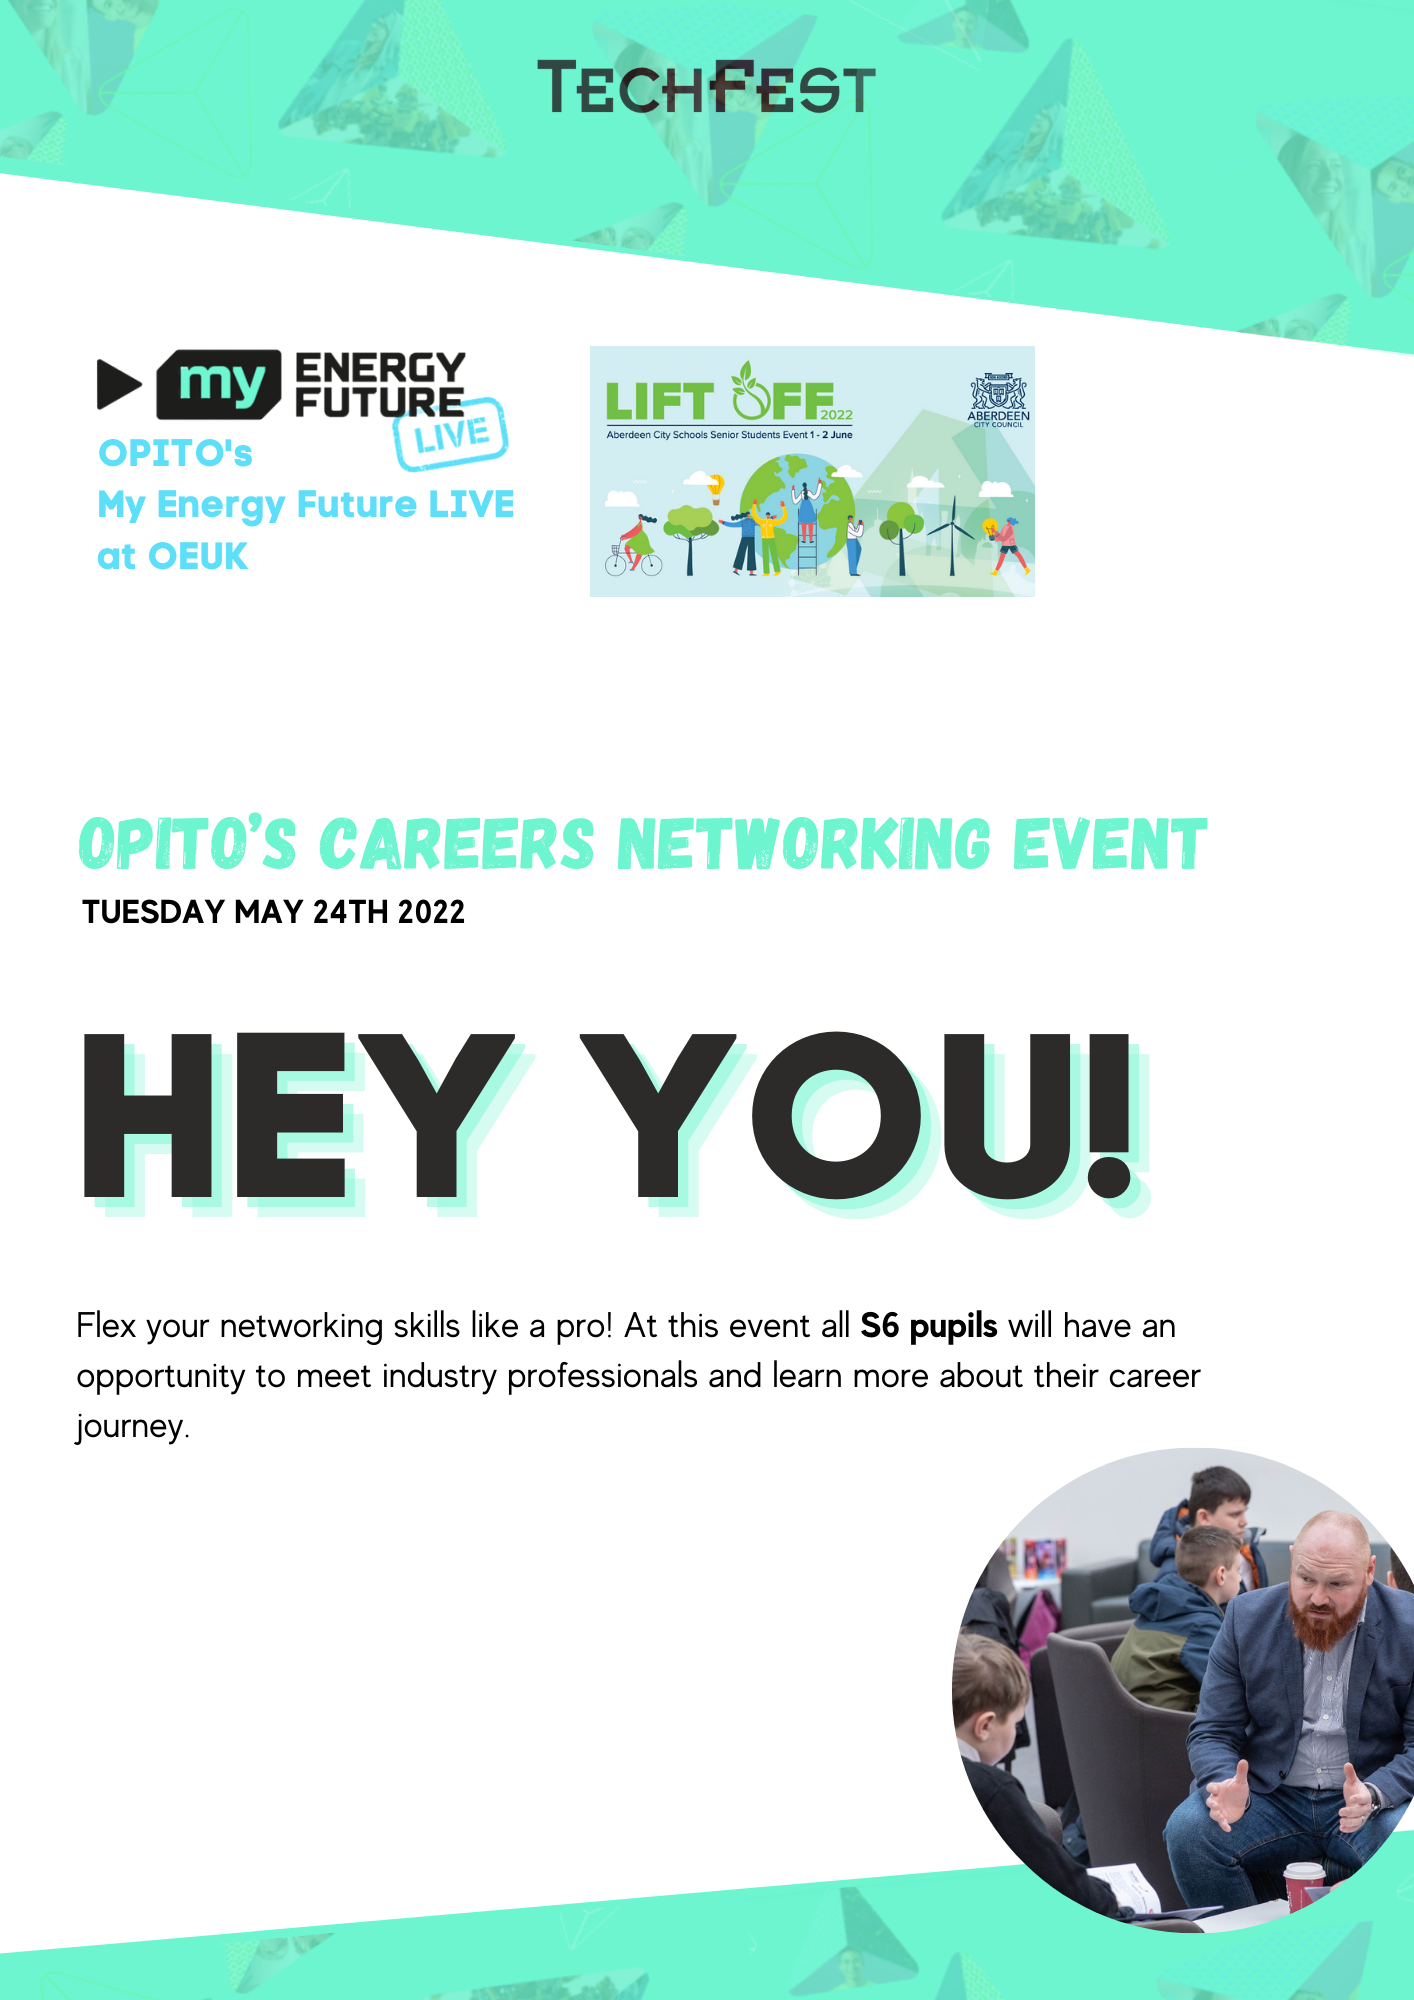 OPITOs Networking Event For Students